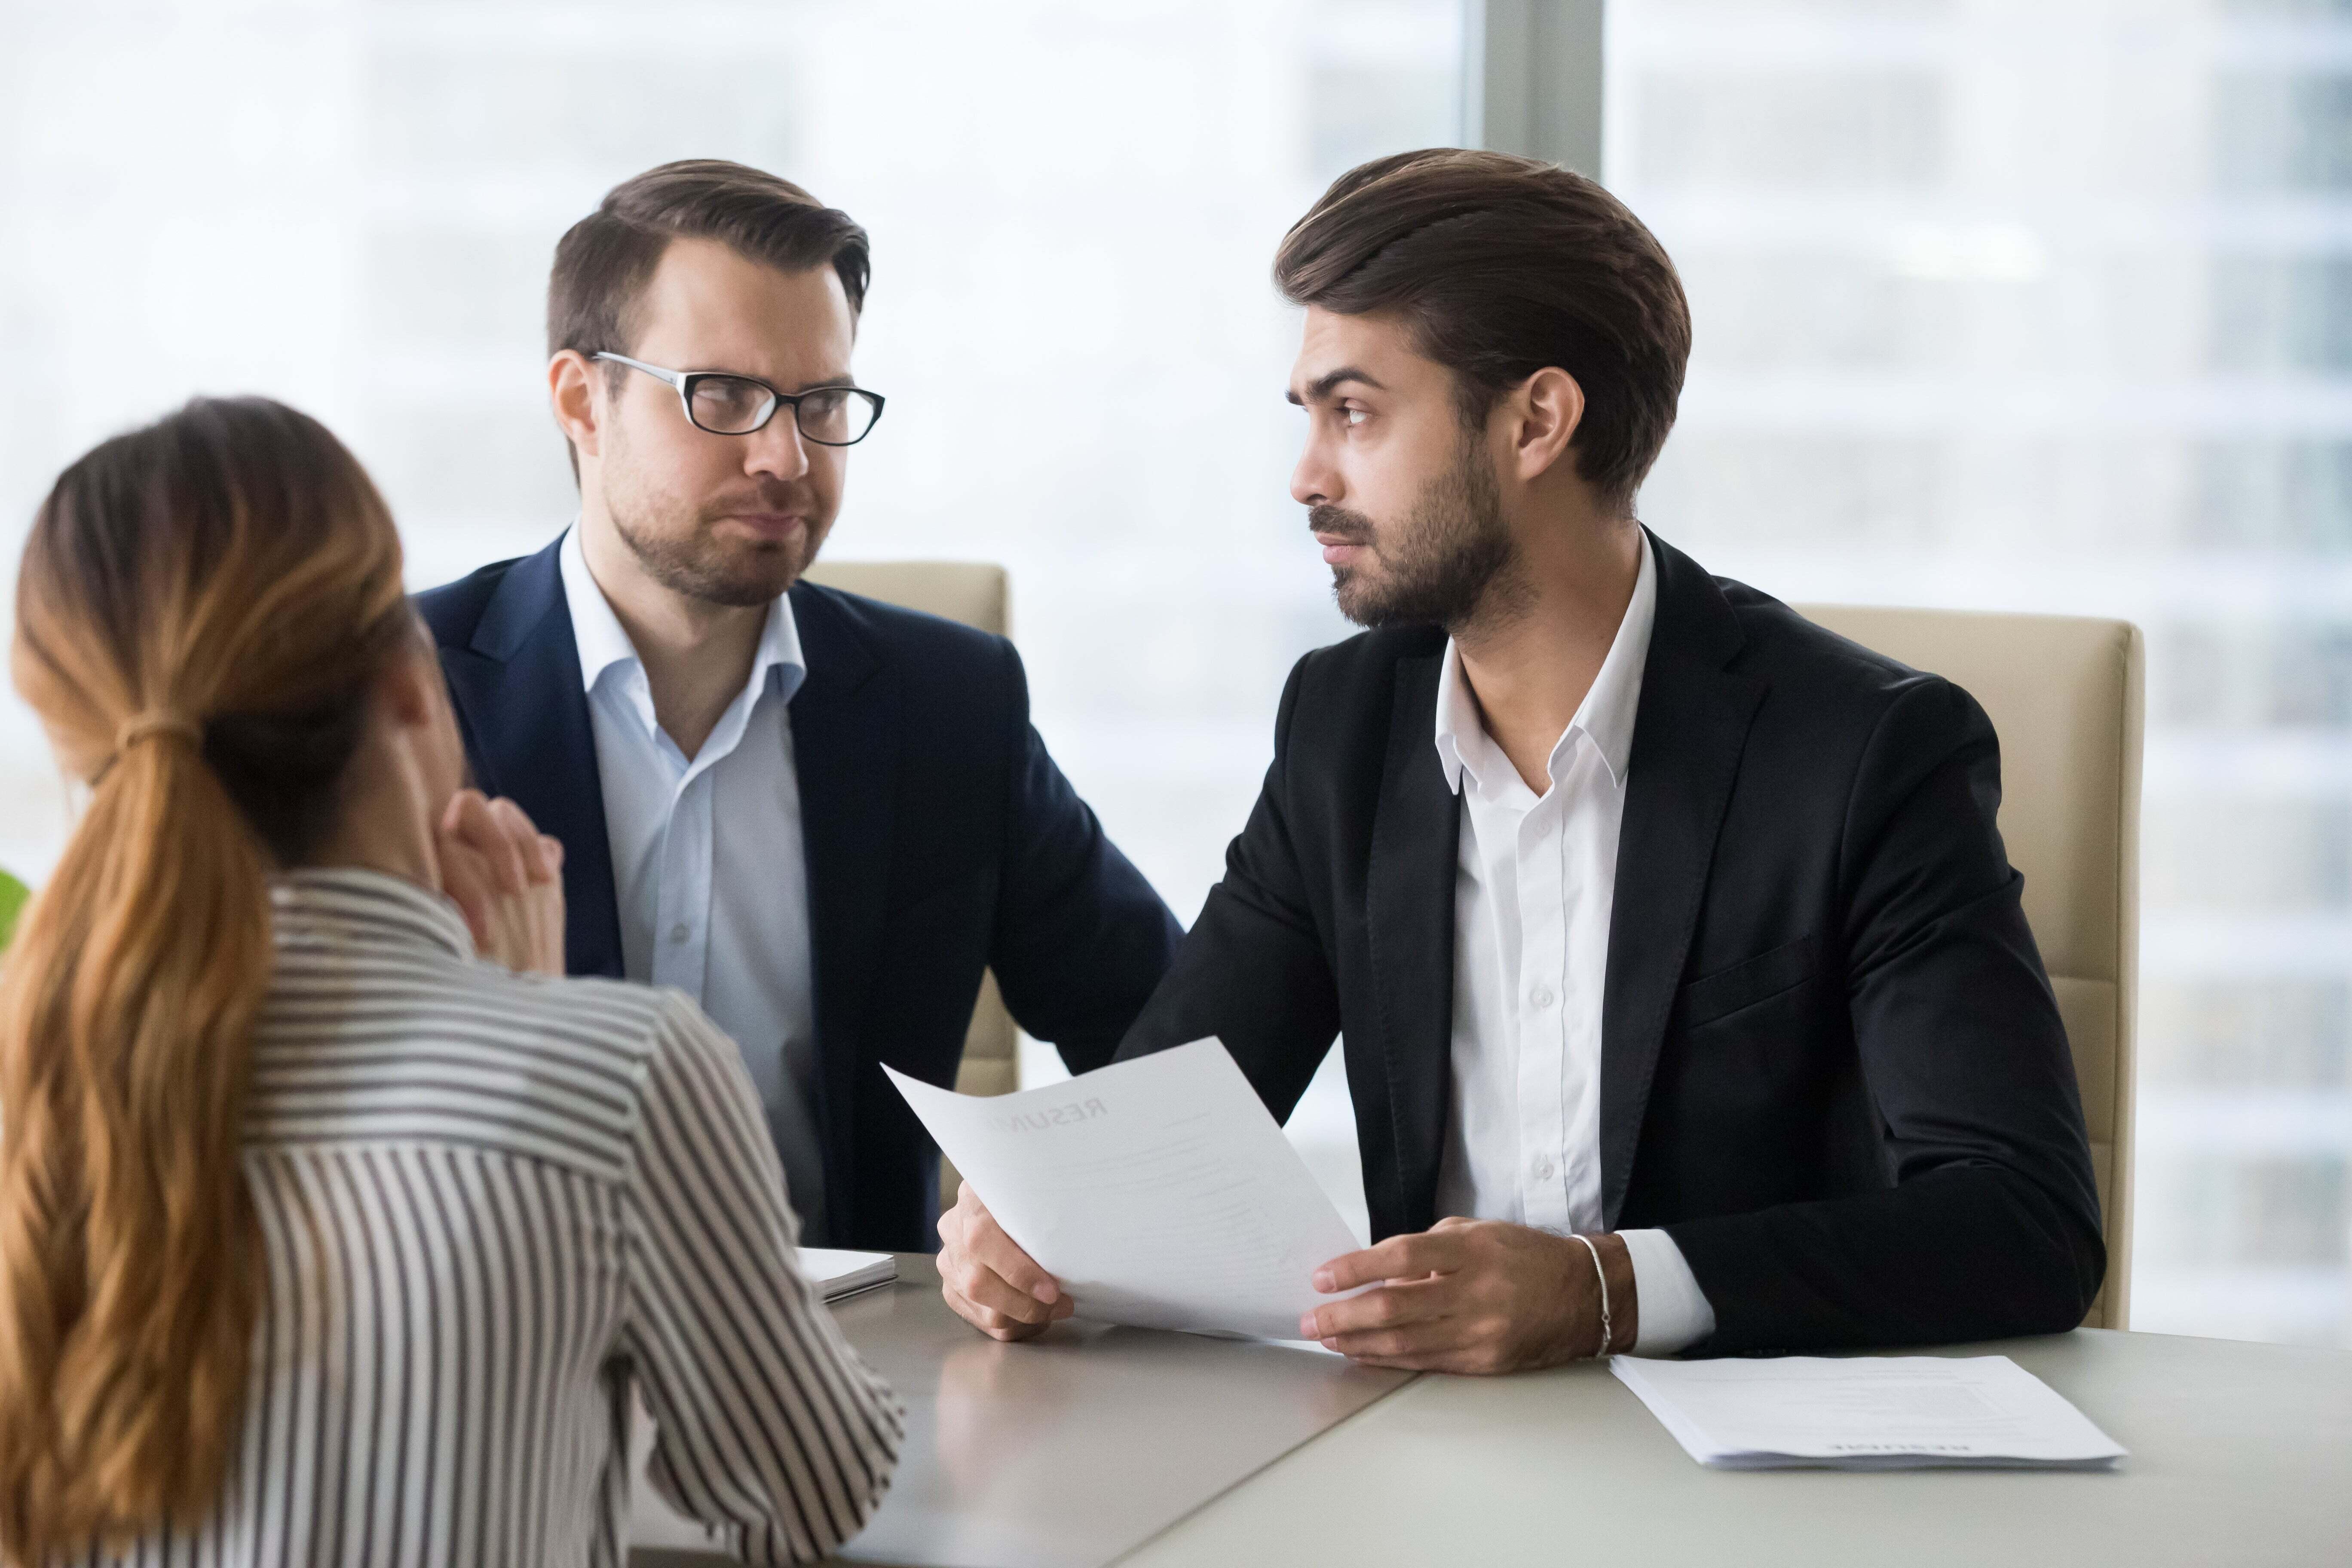 3 Job Interview Red Flags to Look Out For